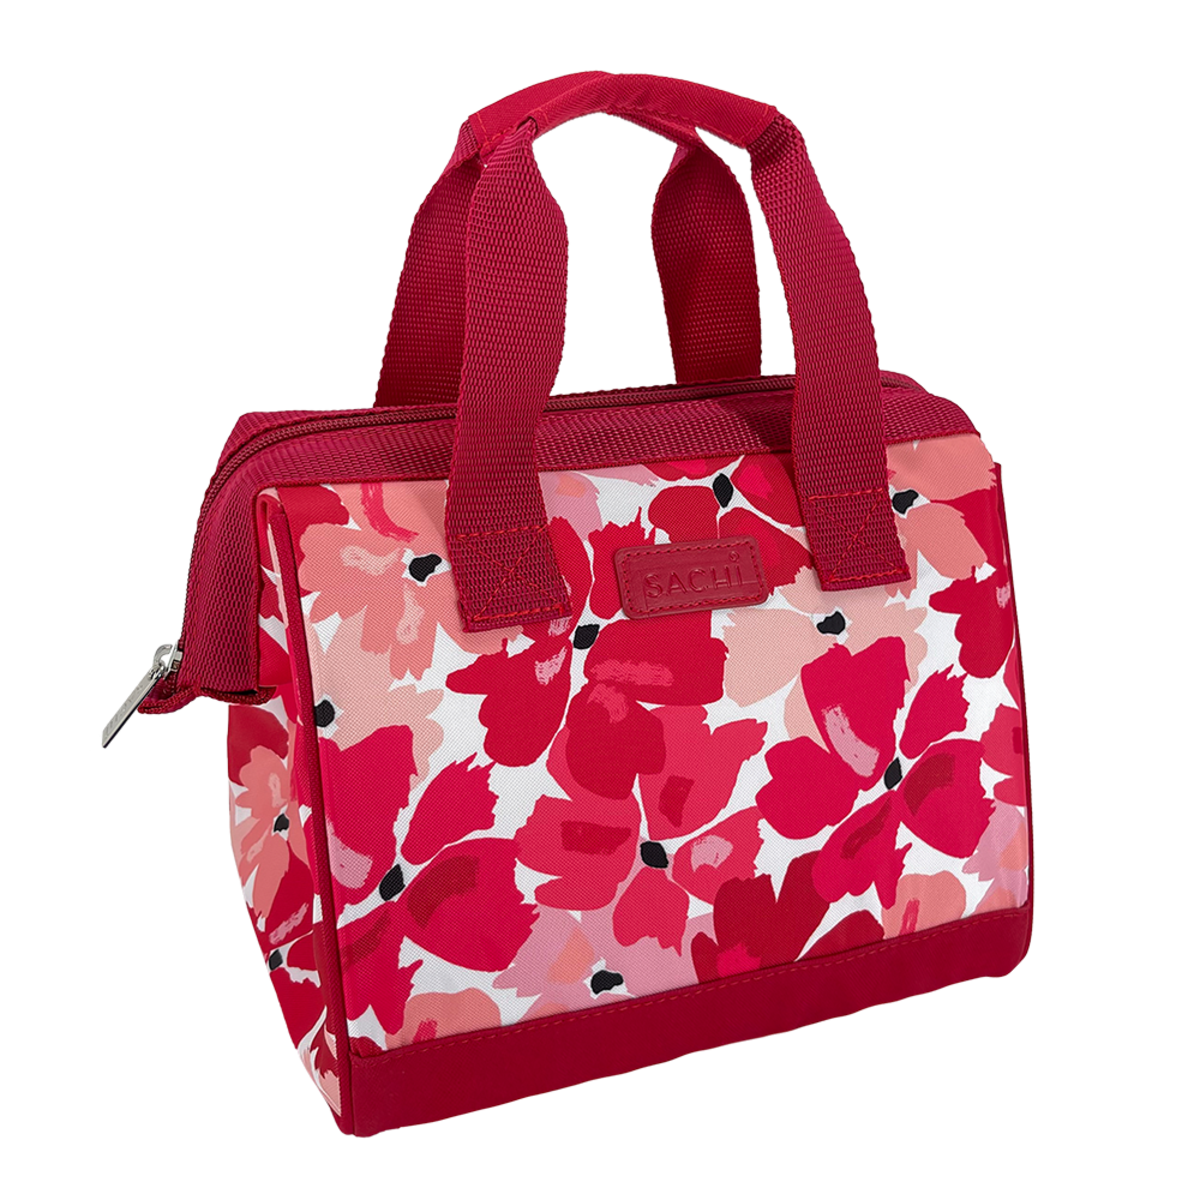 Insulated Lunch Bag Red Poppies